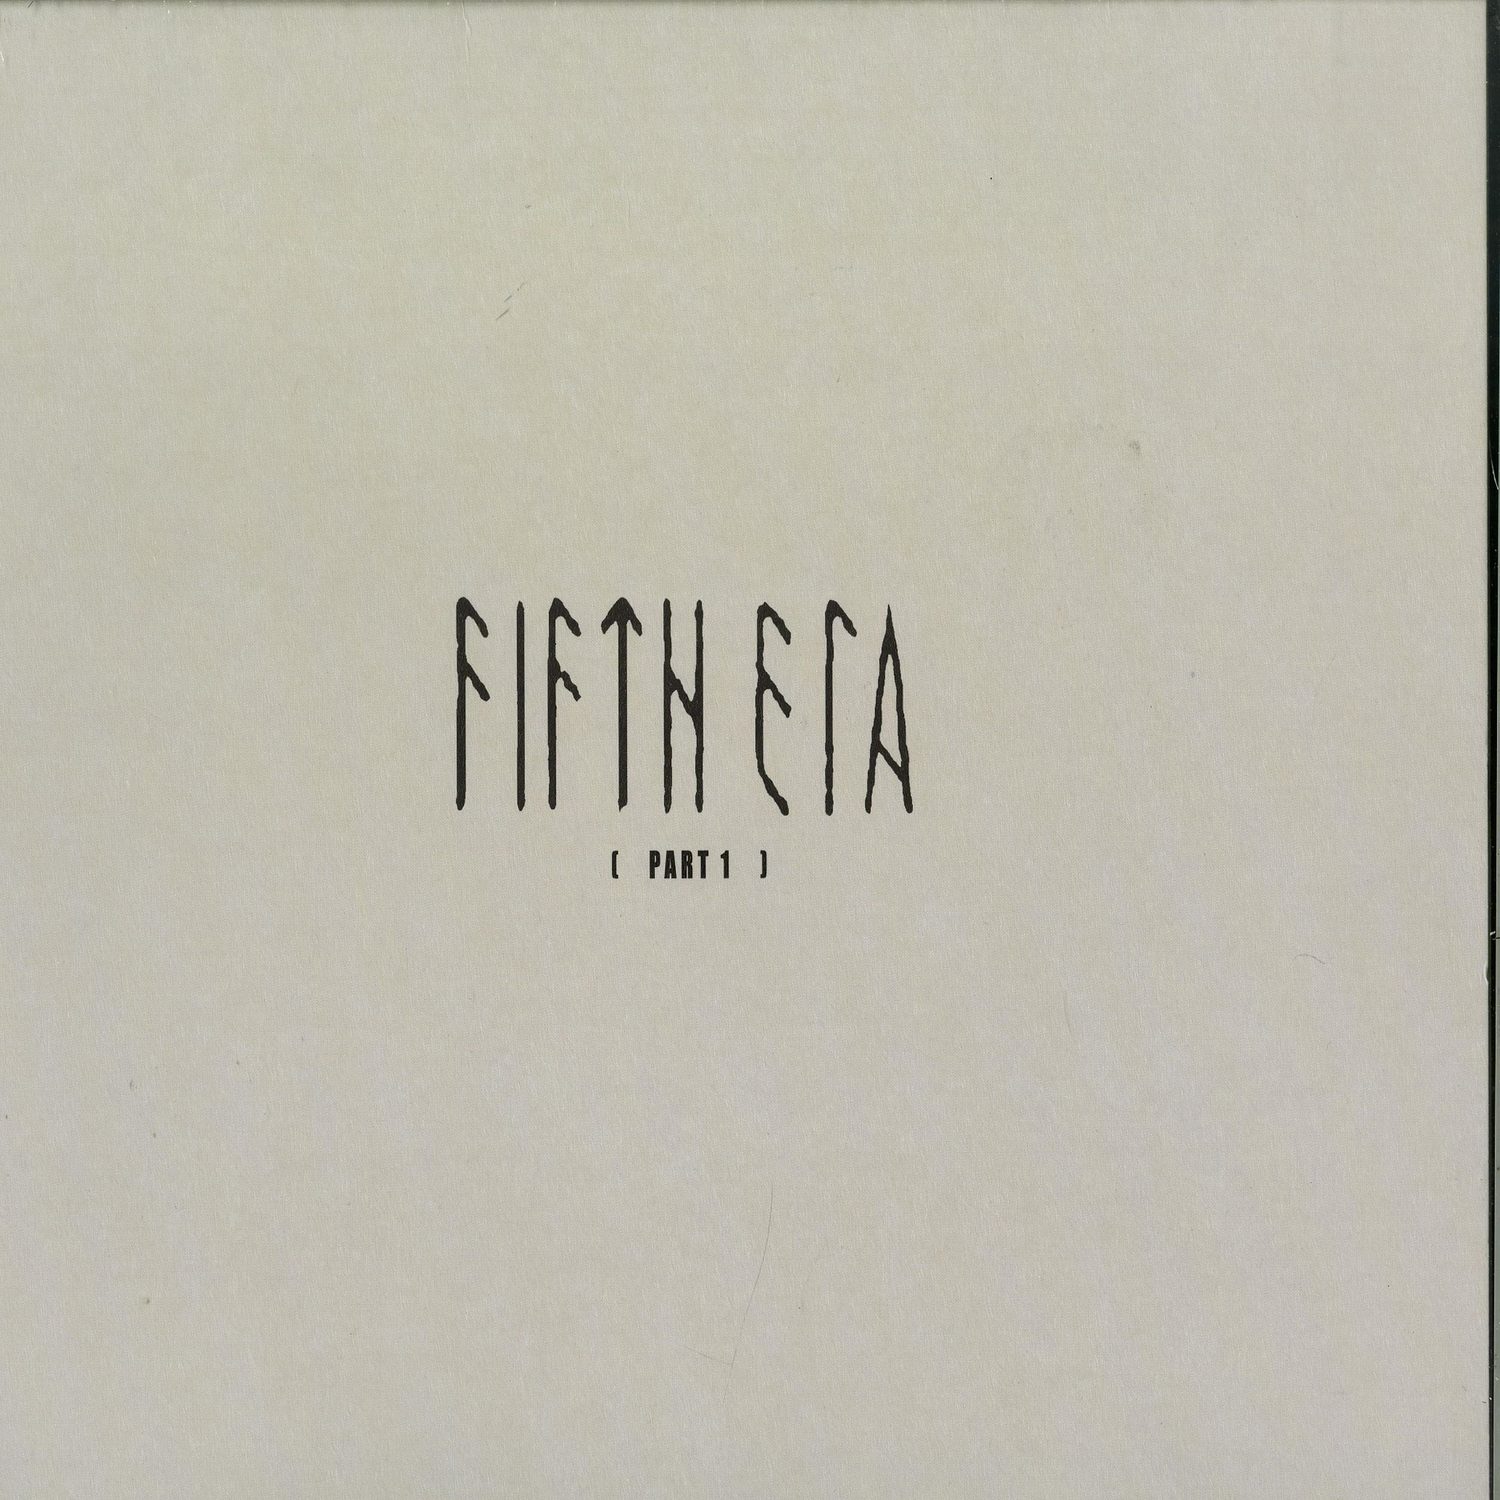 Fifth Era - SELECTED WORKS 1997 - 2004 PART 1 